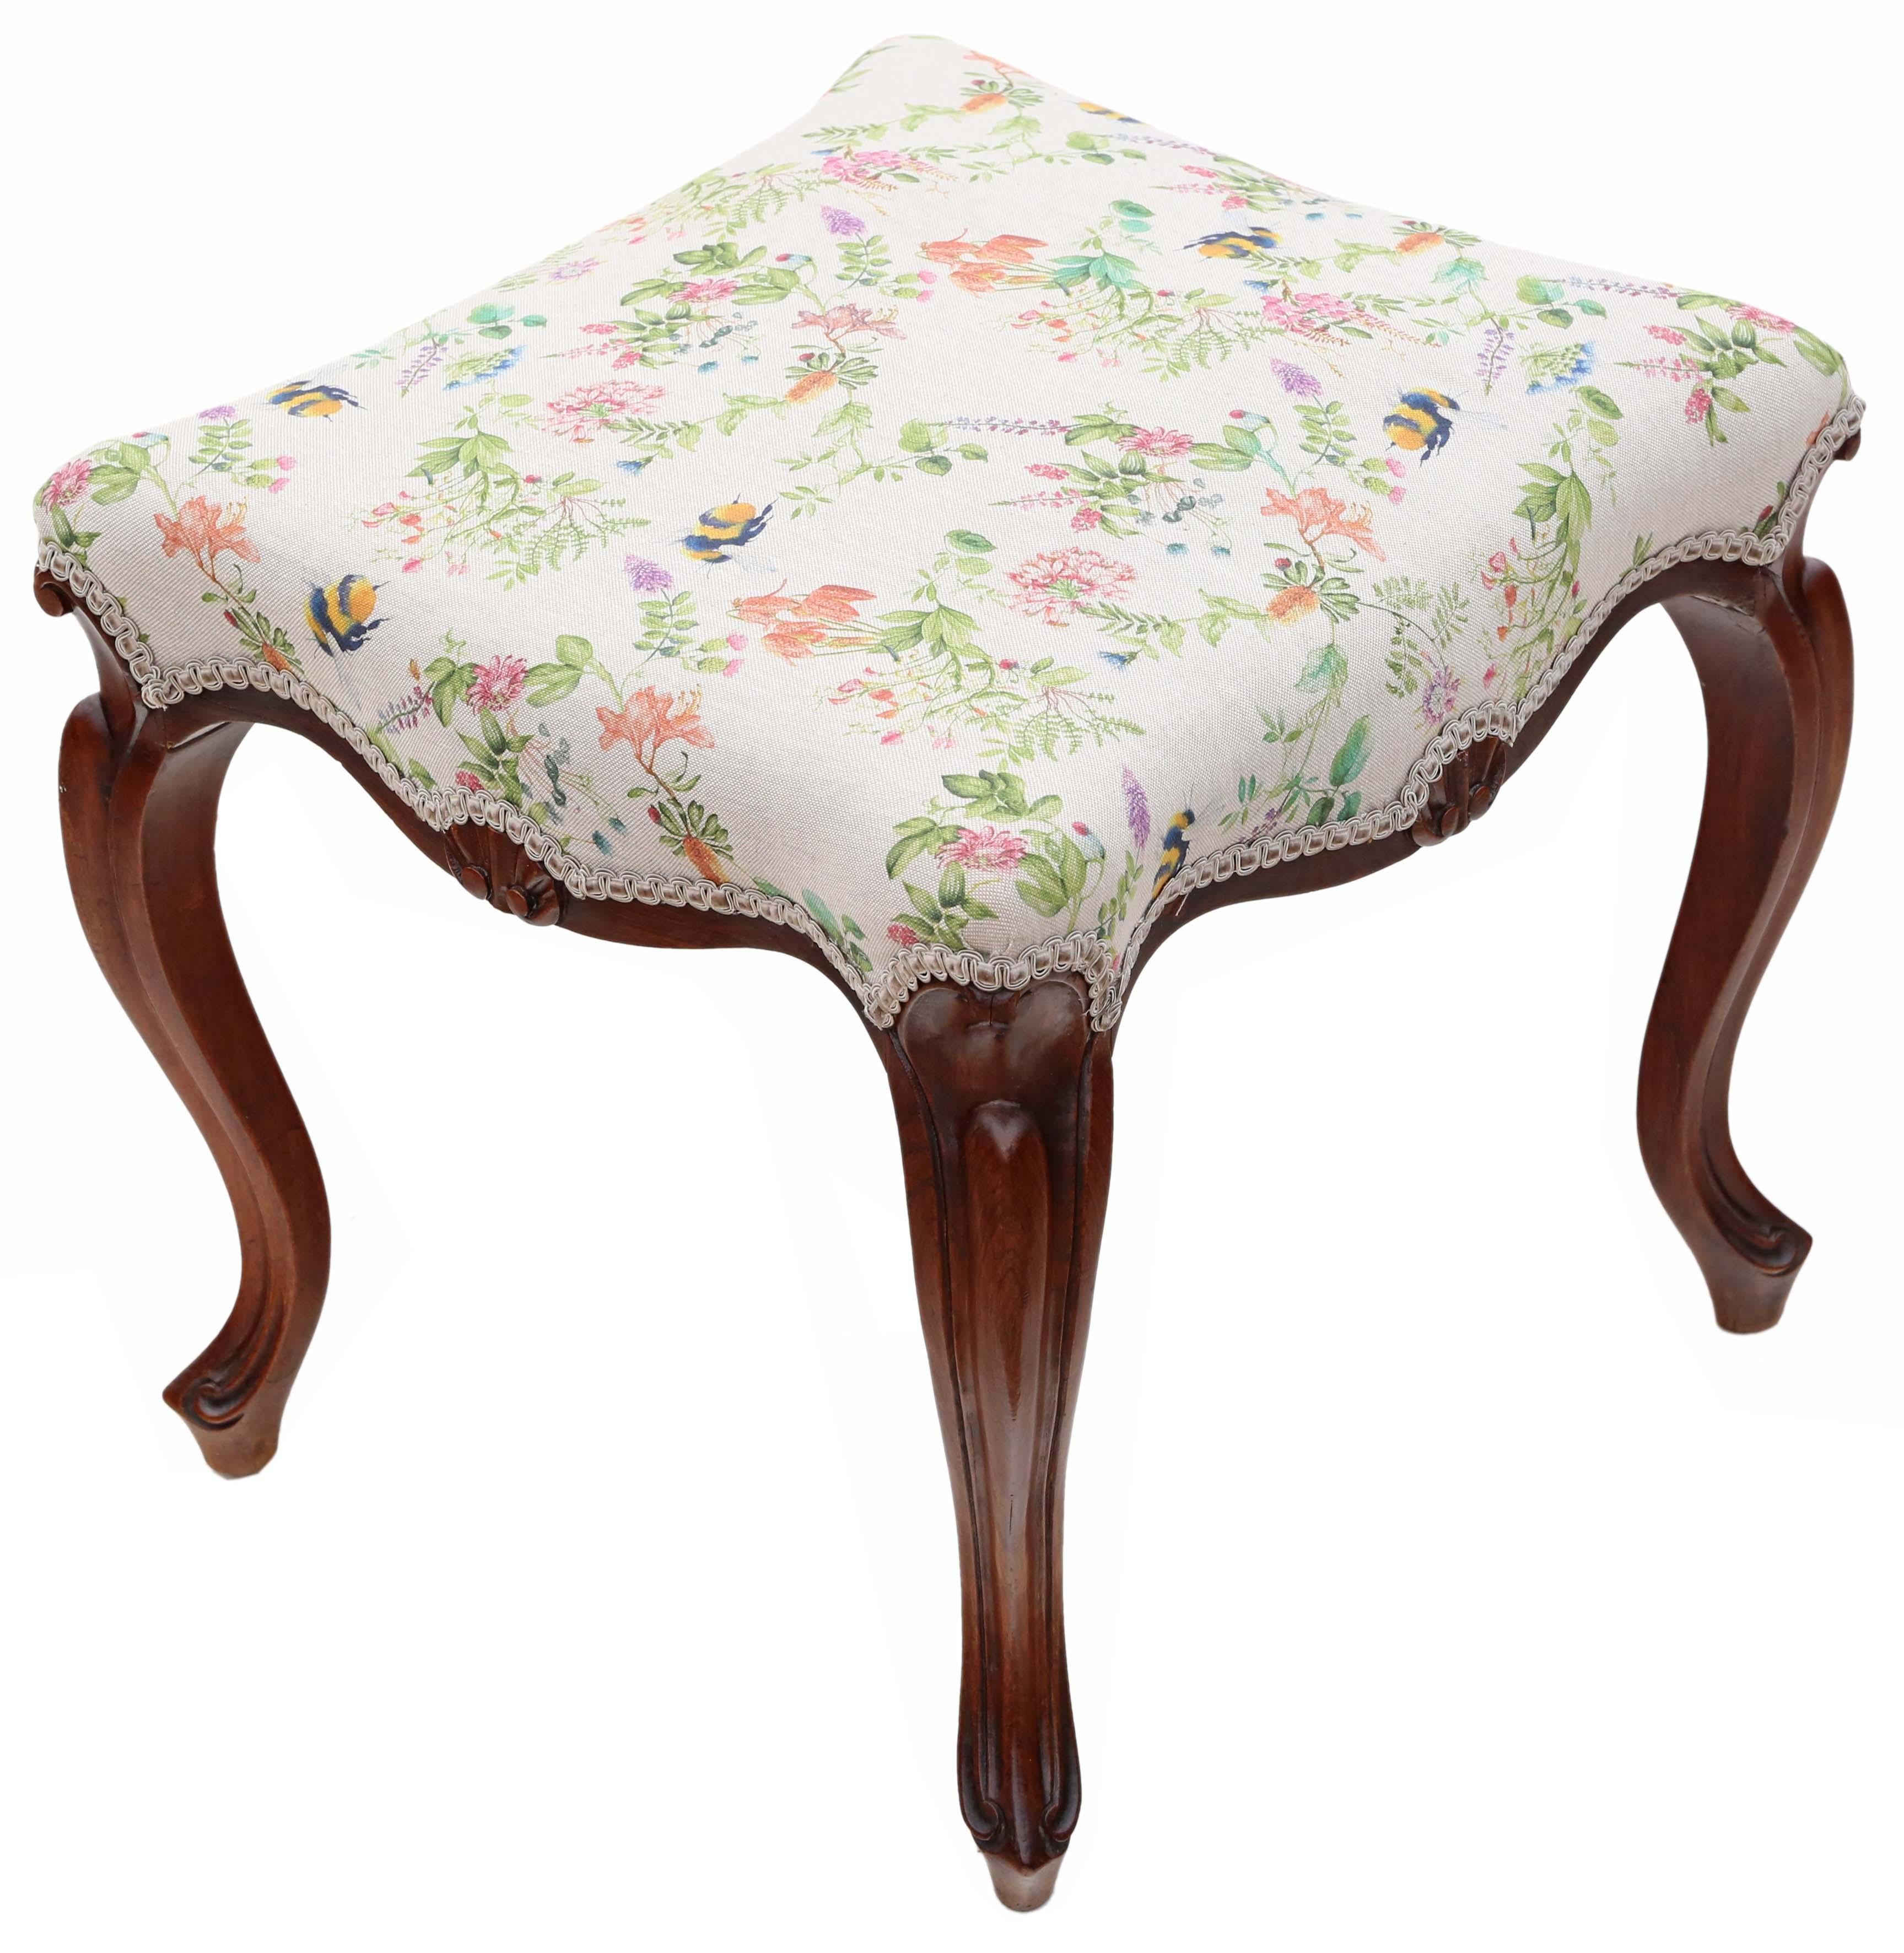 Antique fine quality upholstered rosewood stool 19th Century.

Quality, decorative and attractive, with no loose joints or wobbles.

Would look amazing in the right location, with lovely elegant carved cabriole legs.

Solid, heavy, quality feel,